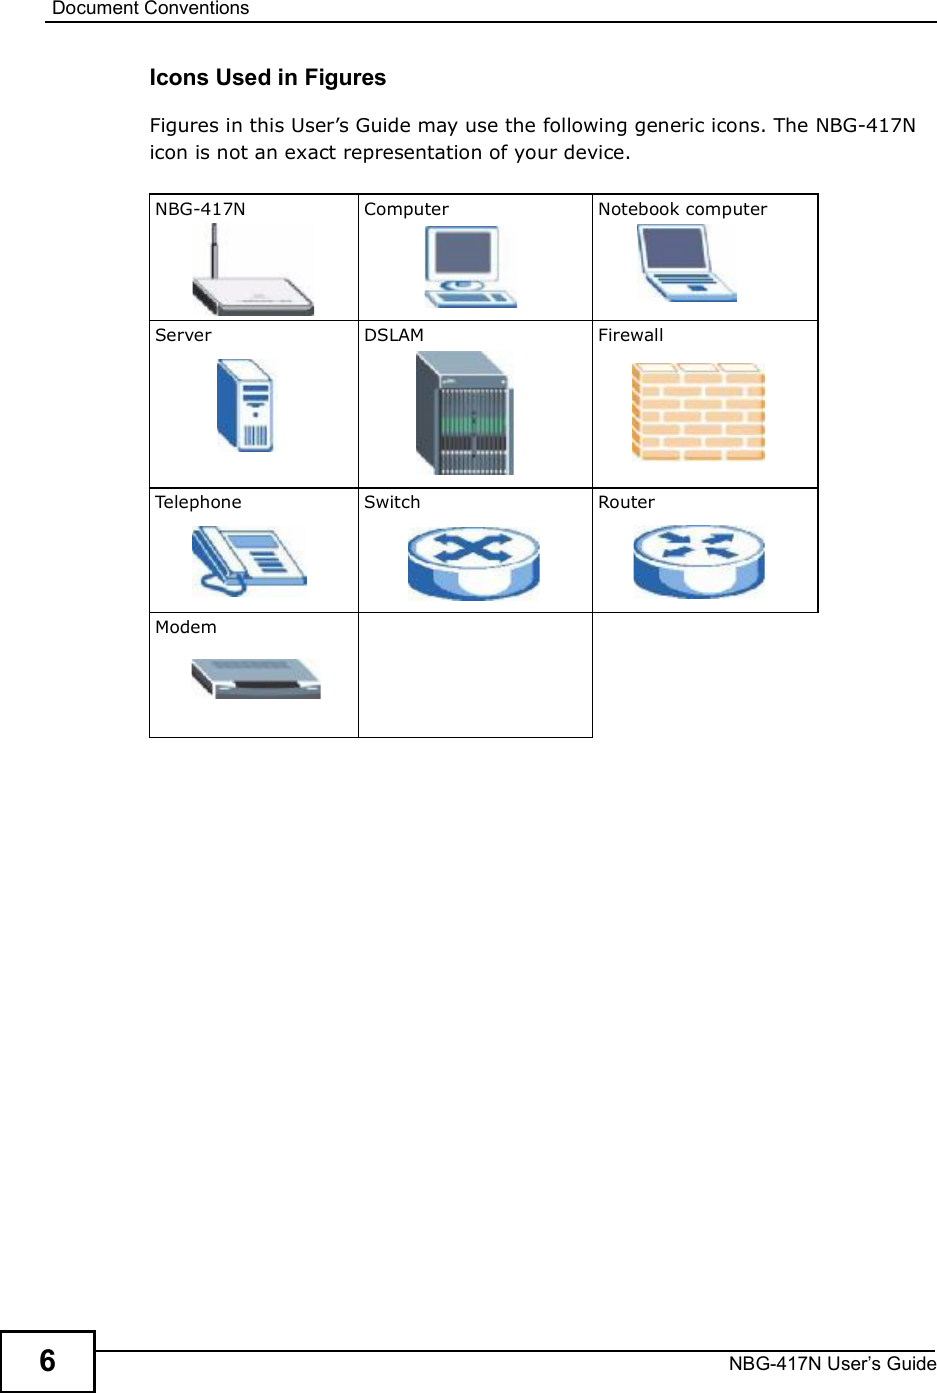 Document ConventionsNBG-417N User s Guide6Icons Used in FiguresFigures in this User!s Guide may use the following generic icons. The NBG-417N icon is not an exact representation of your device.NBG-417N Computer Notebook computerServer DSLAM FirewallTelephone Switch RouterModem